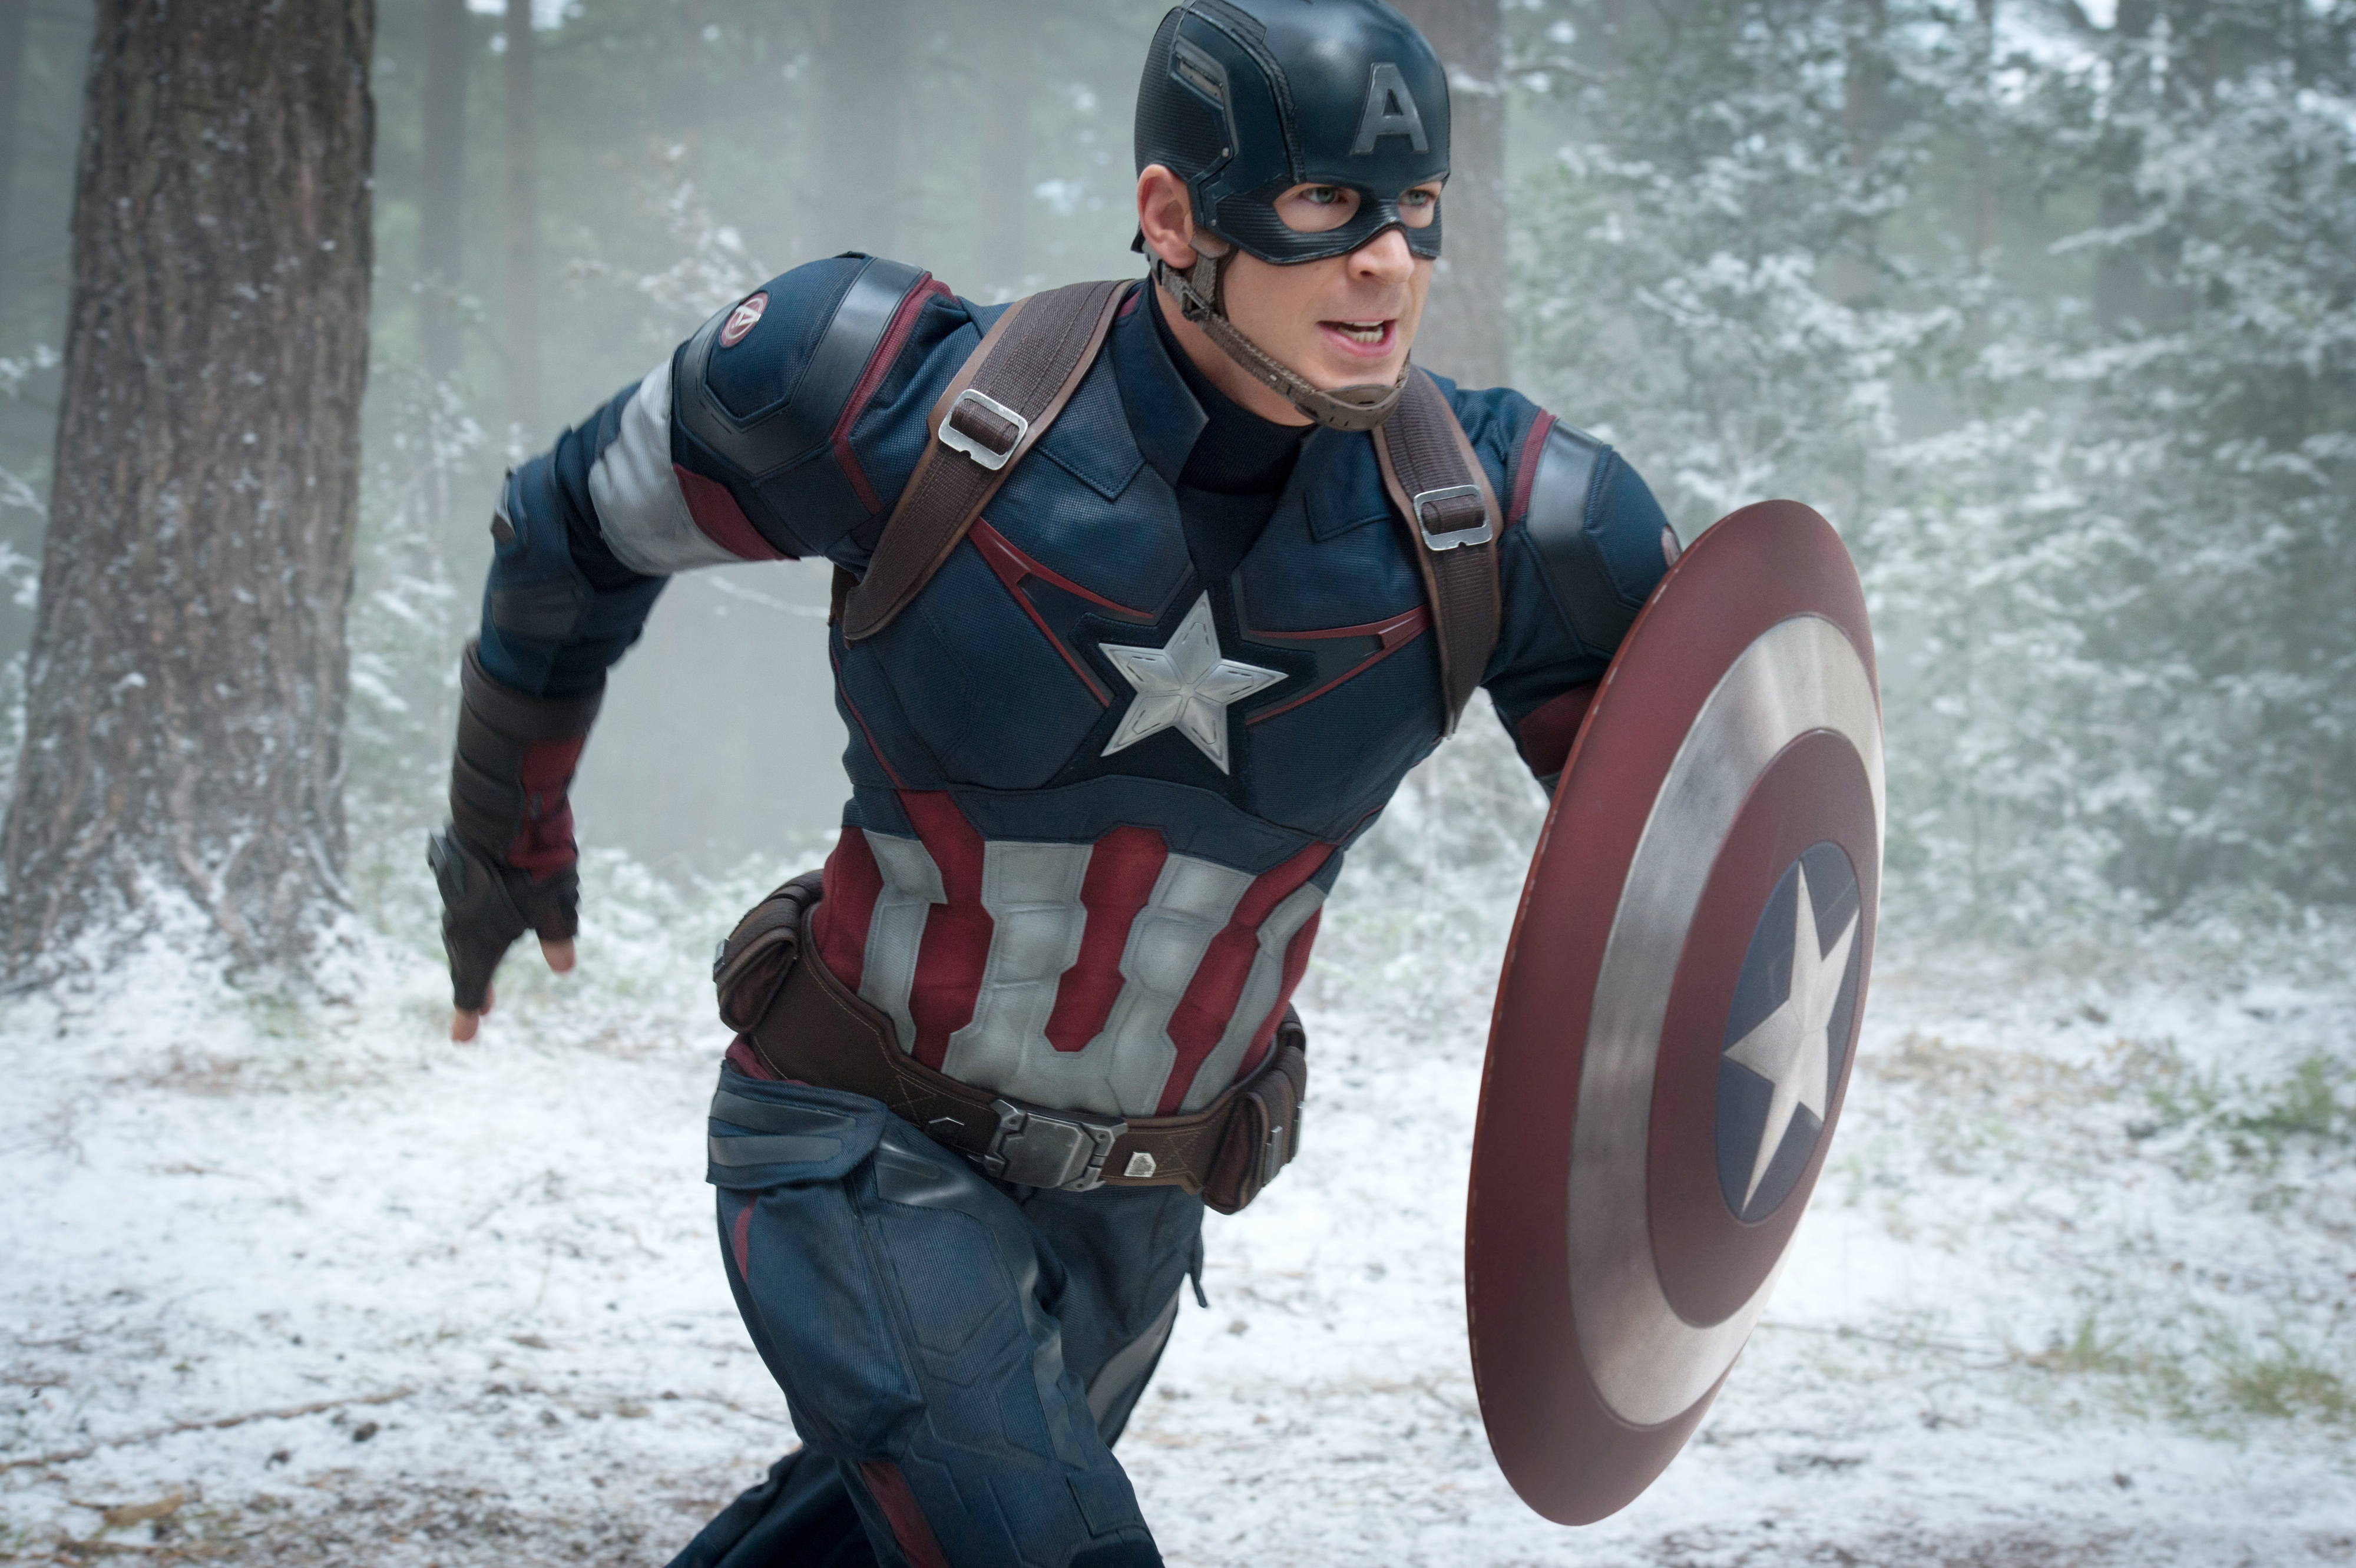 Closeup of Chris as Captain America running through a snowy forest